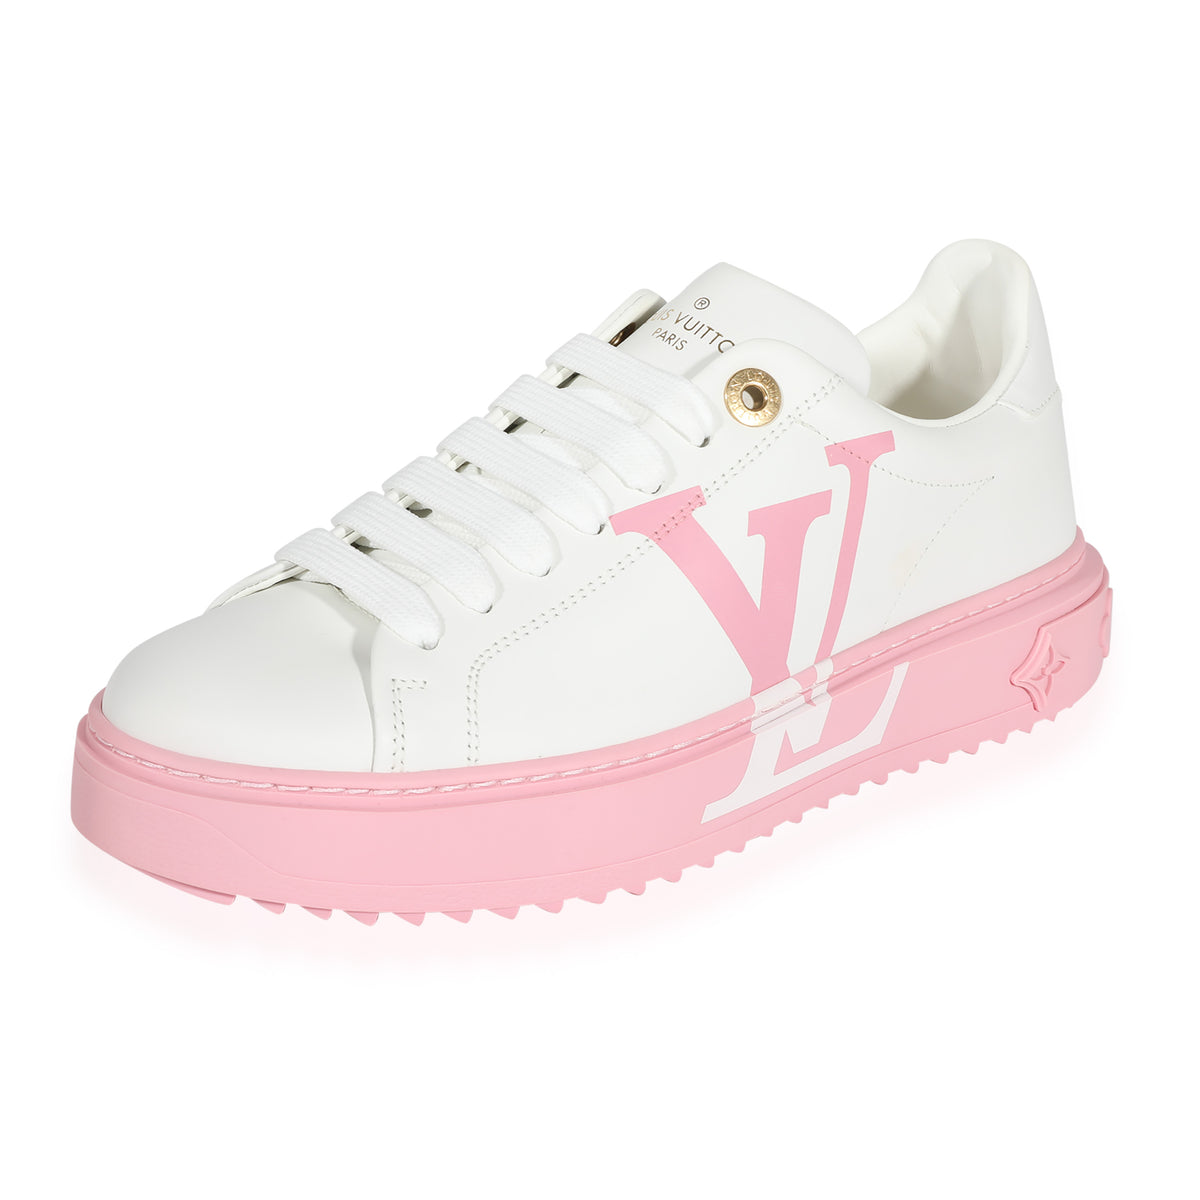 Louis Vuitton TIME OUT SNEAKER light pink